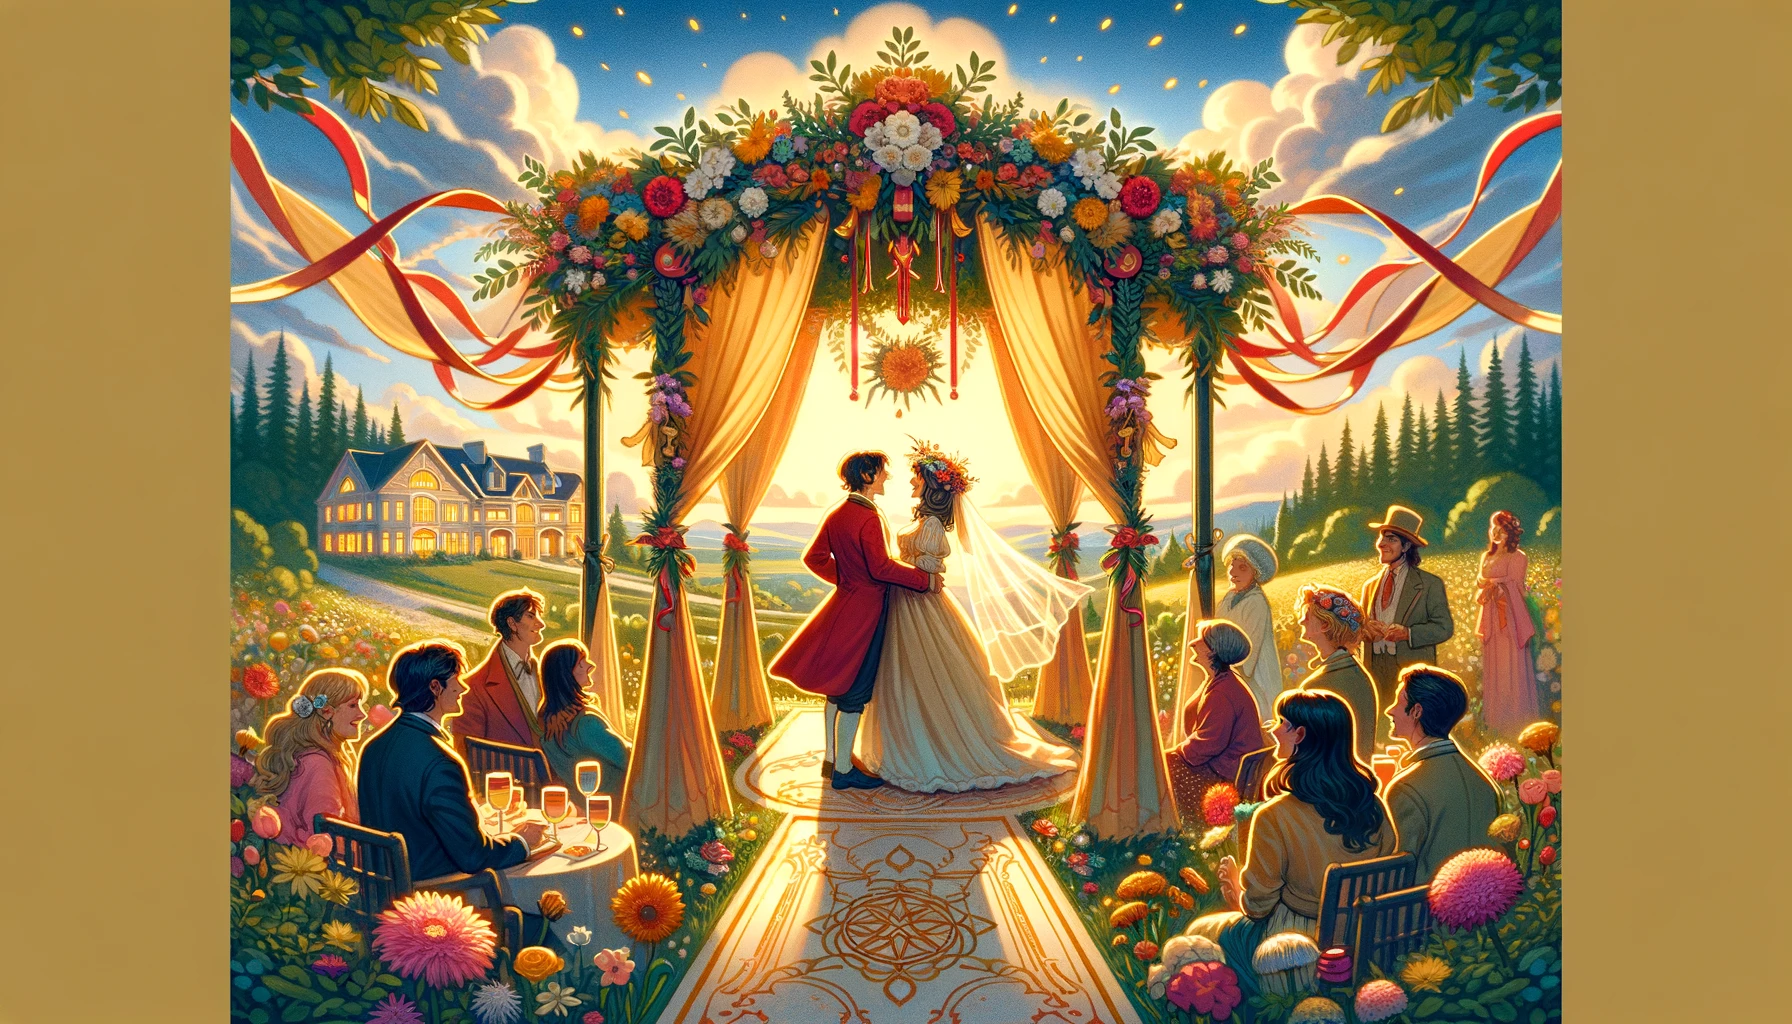 The image depicts a joyous couple celebrating a significant milestone amidst their supportive community, symbolizing themes of celebration, stability, and shared success in their relationship. The backdrop signifies the foundation and promising future of their union.